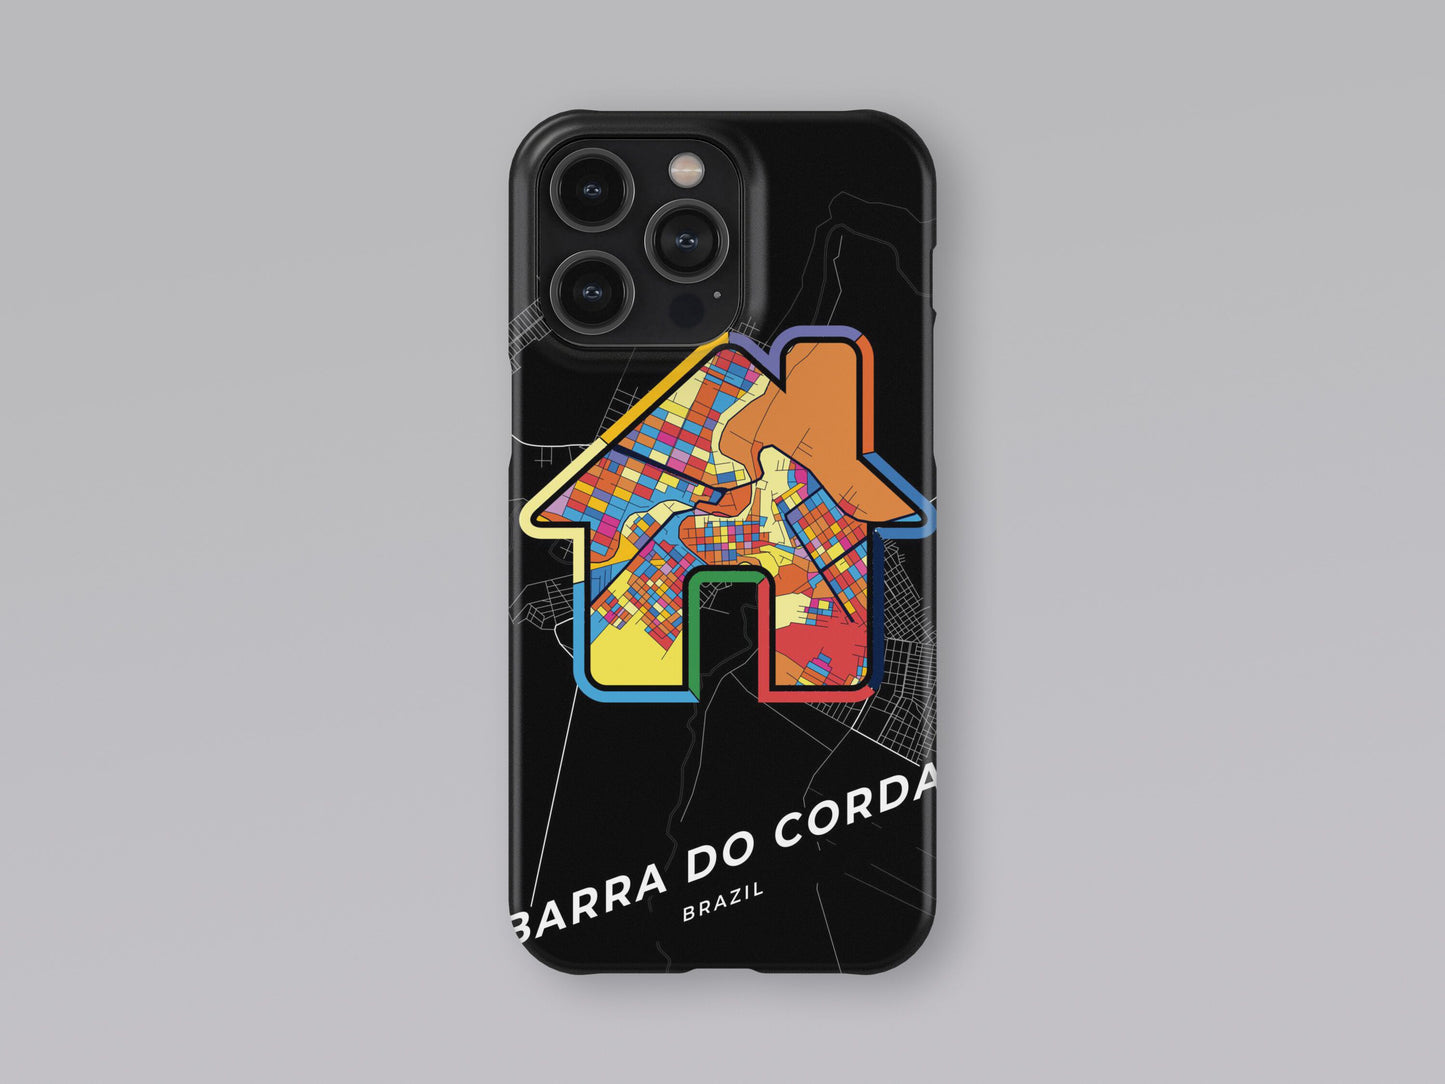 Barra Do Corda Brazil slim phone case with colorful icon. Birthday, wedding or housewarming gift. Couple match cases. 3